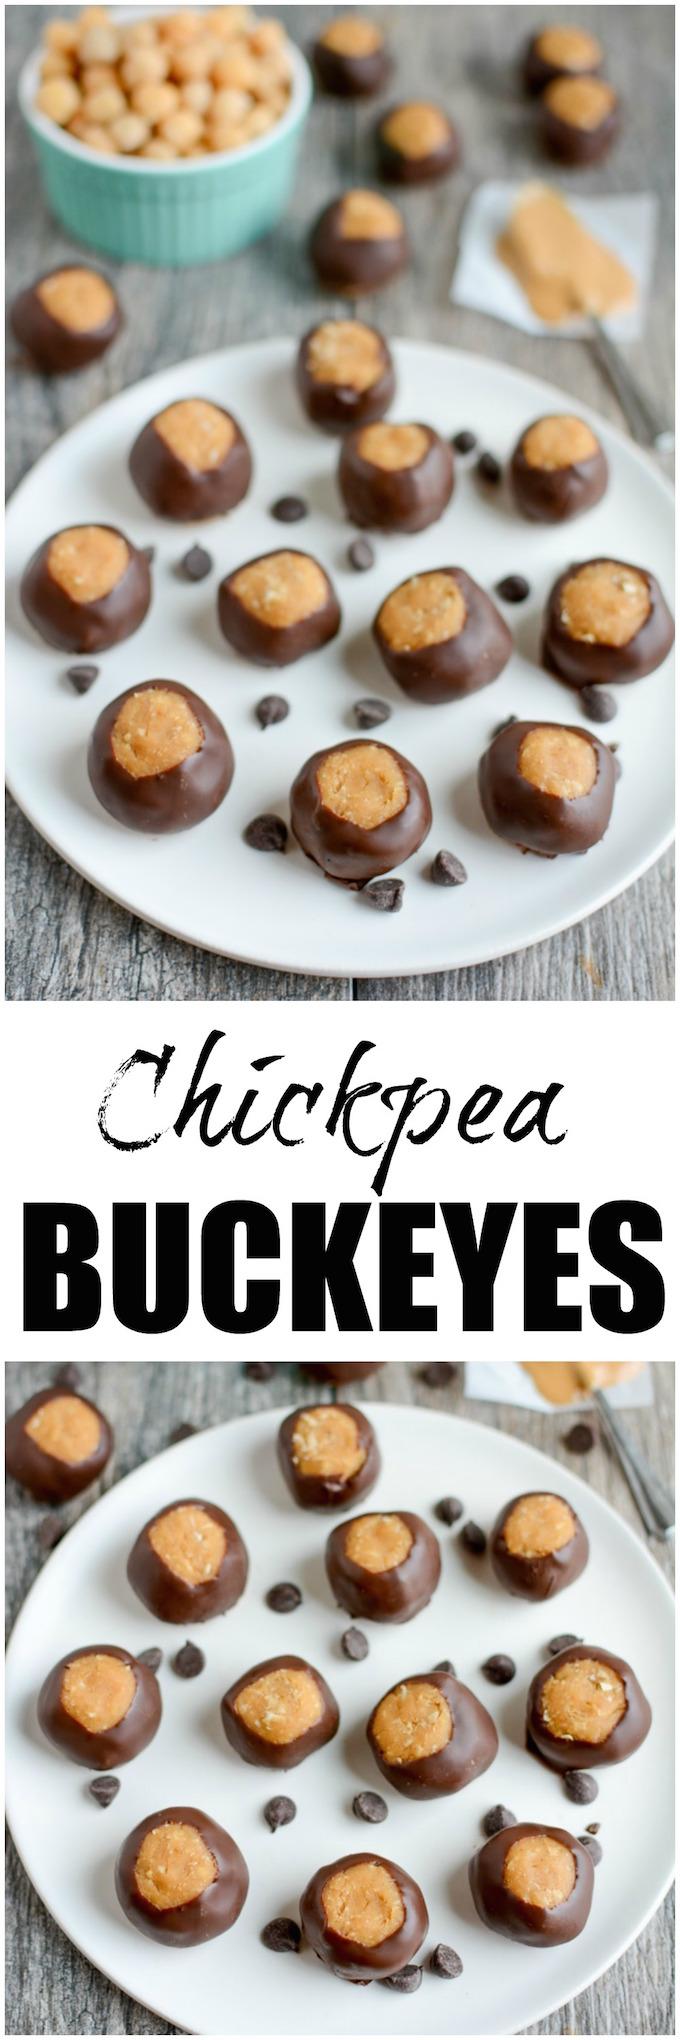 These Chickpea Buckeyes are a healthier twist on a classic dessert! They're full of flavor with an extra boost of fiber as well. 